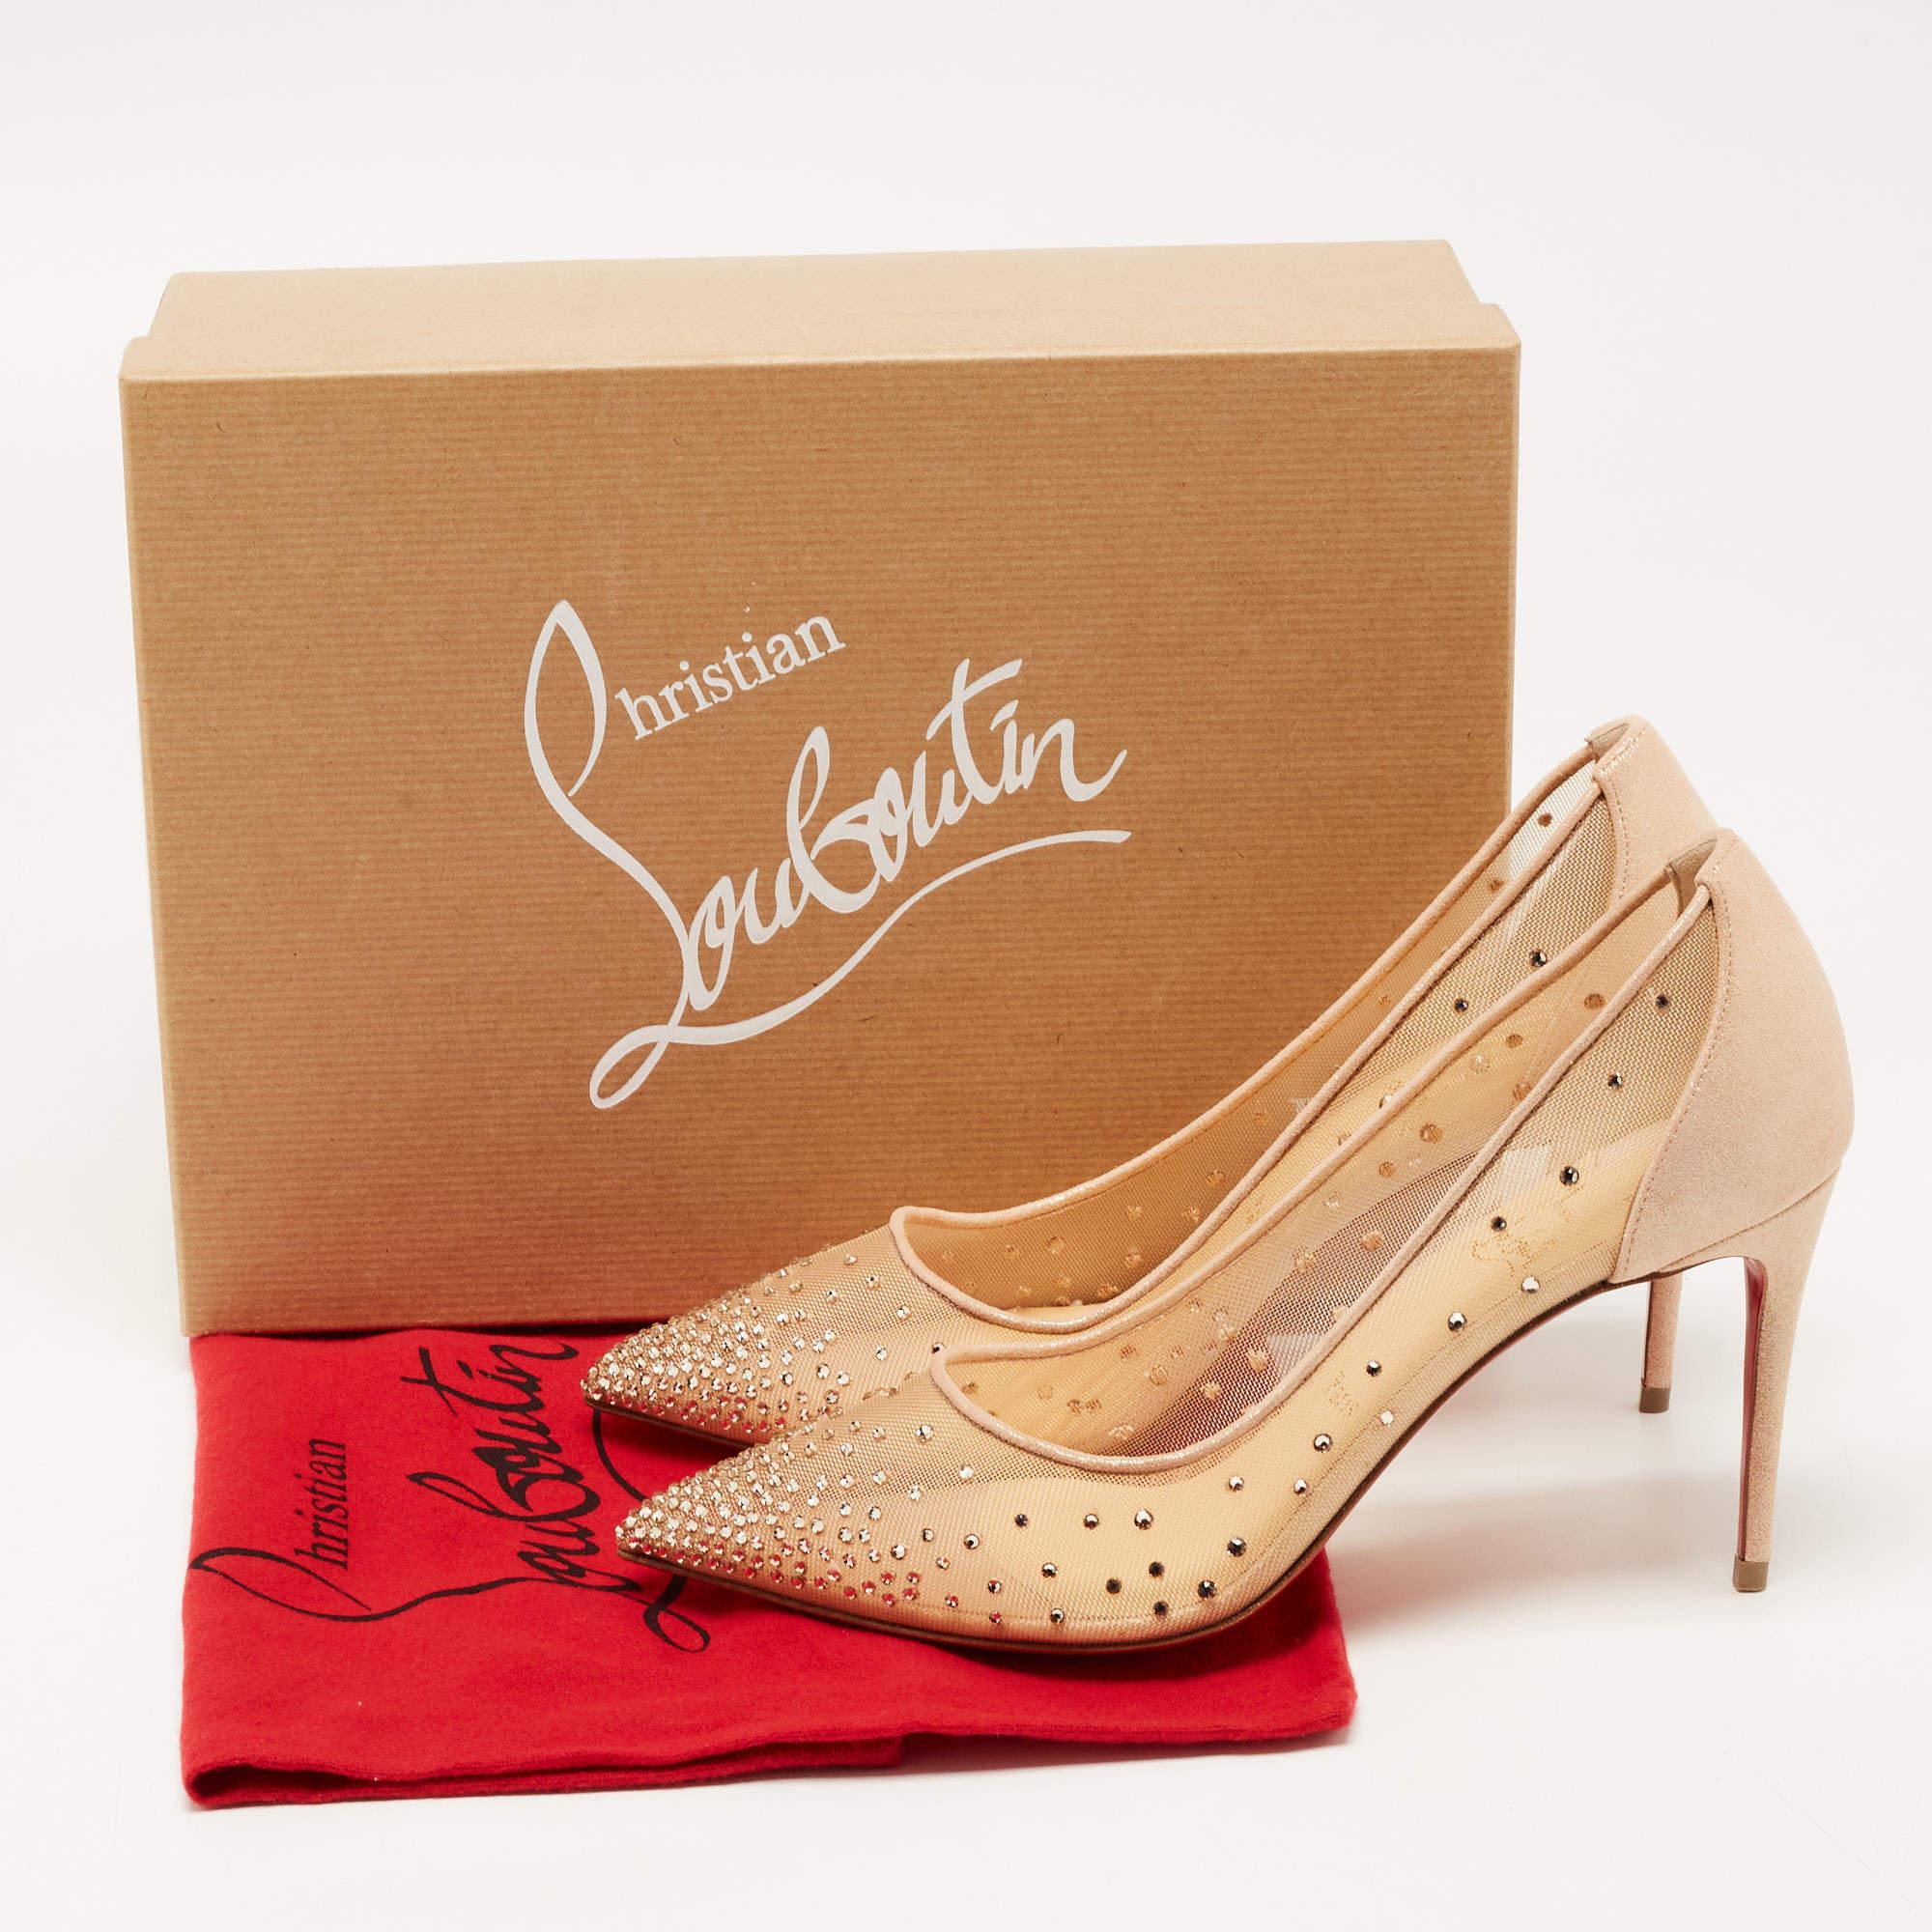 Christian Louboutin Beige Suede Follies Strass Pointed Toe Pumps Size 39 2